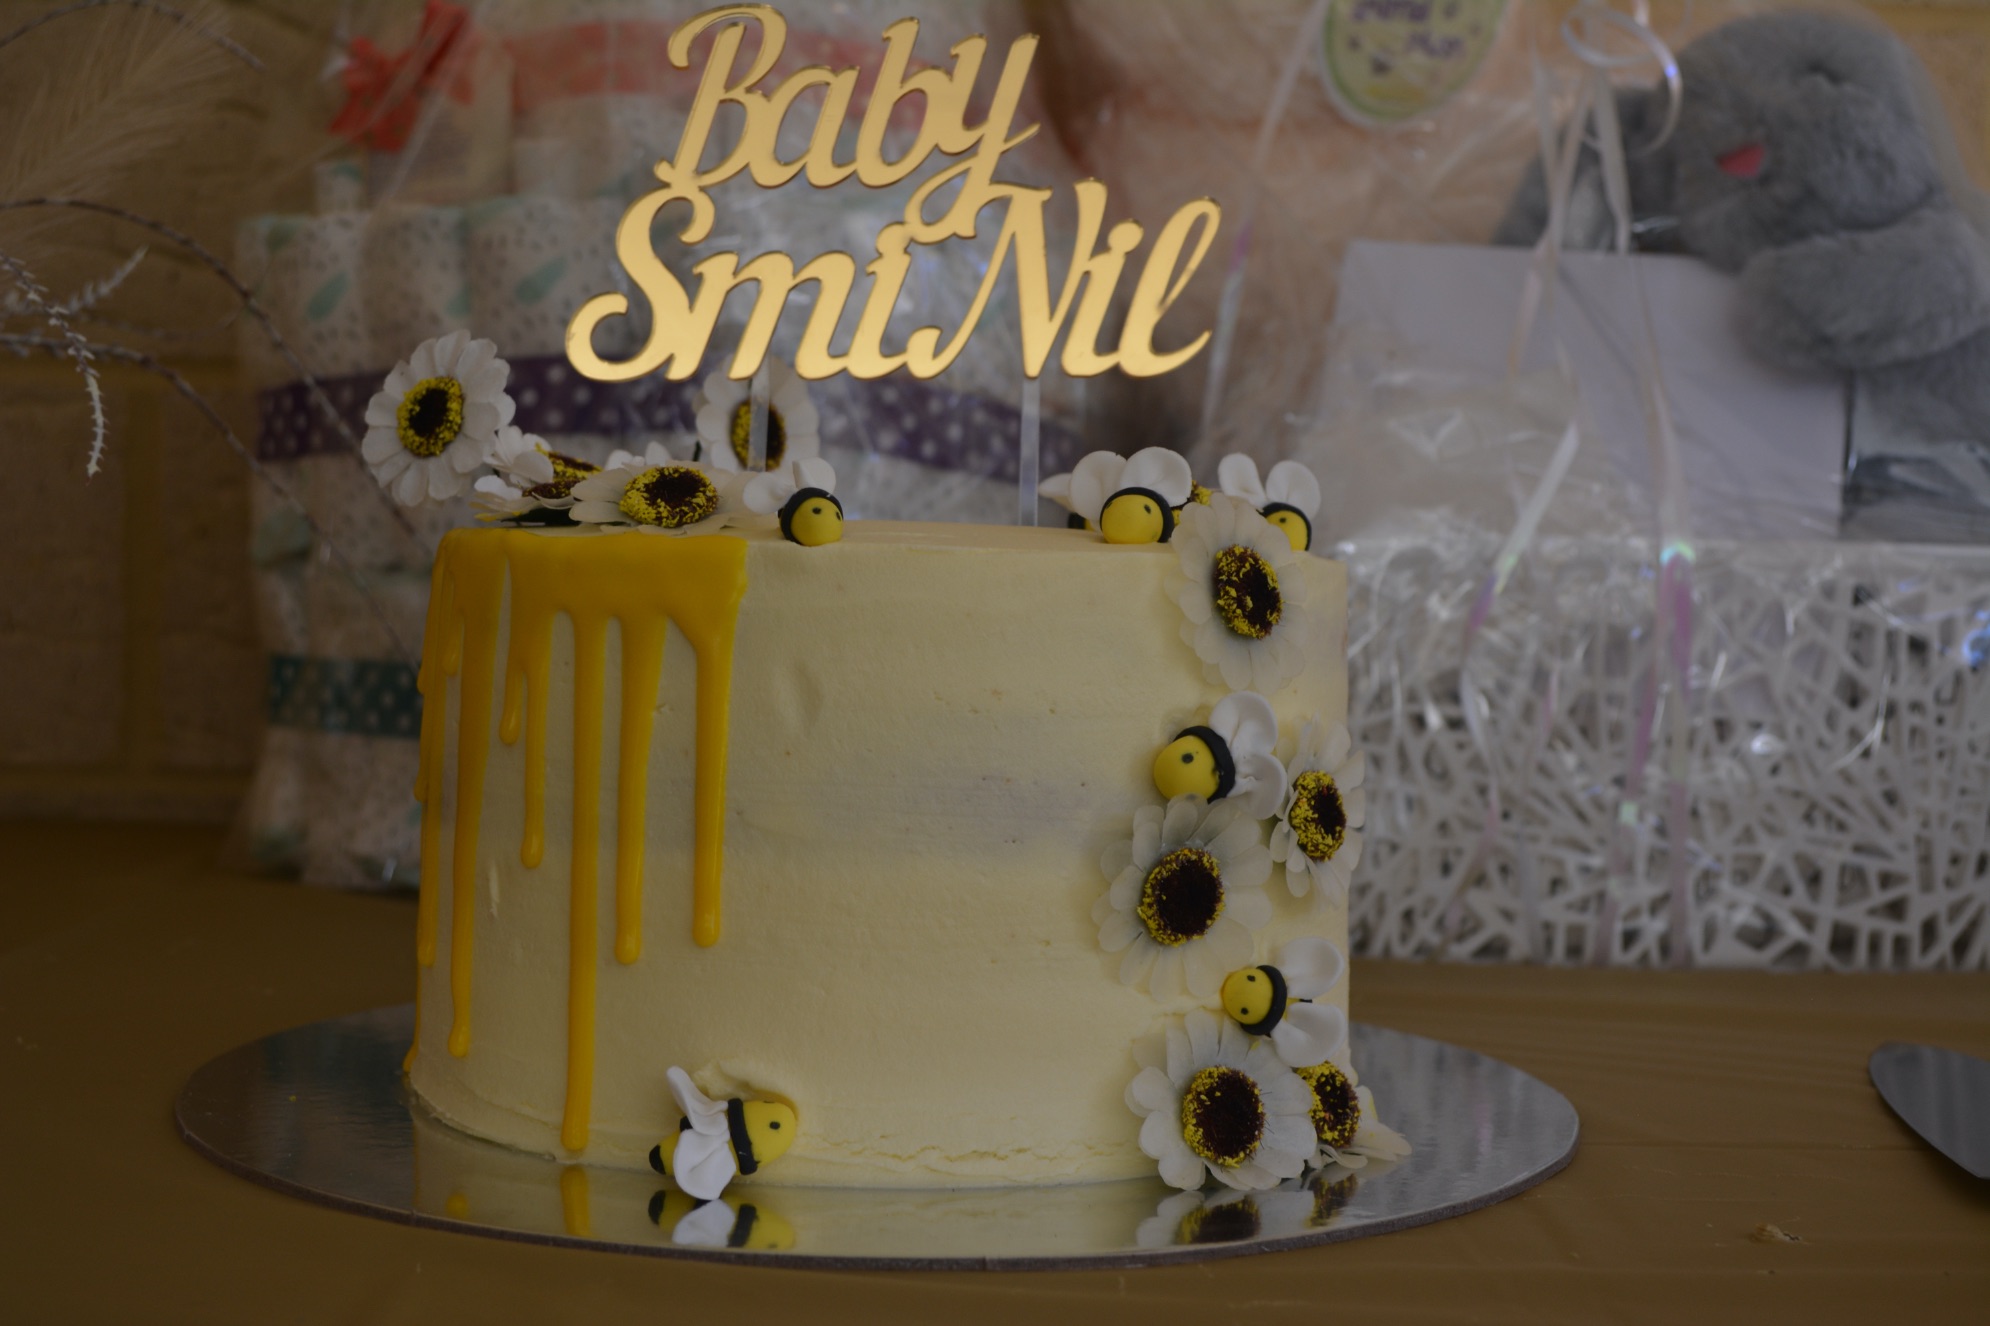 Bright sunflower baby shower for a 'mum to bee'